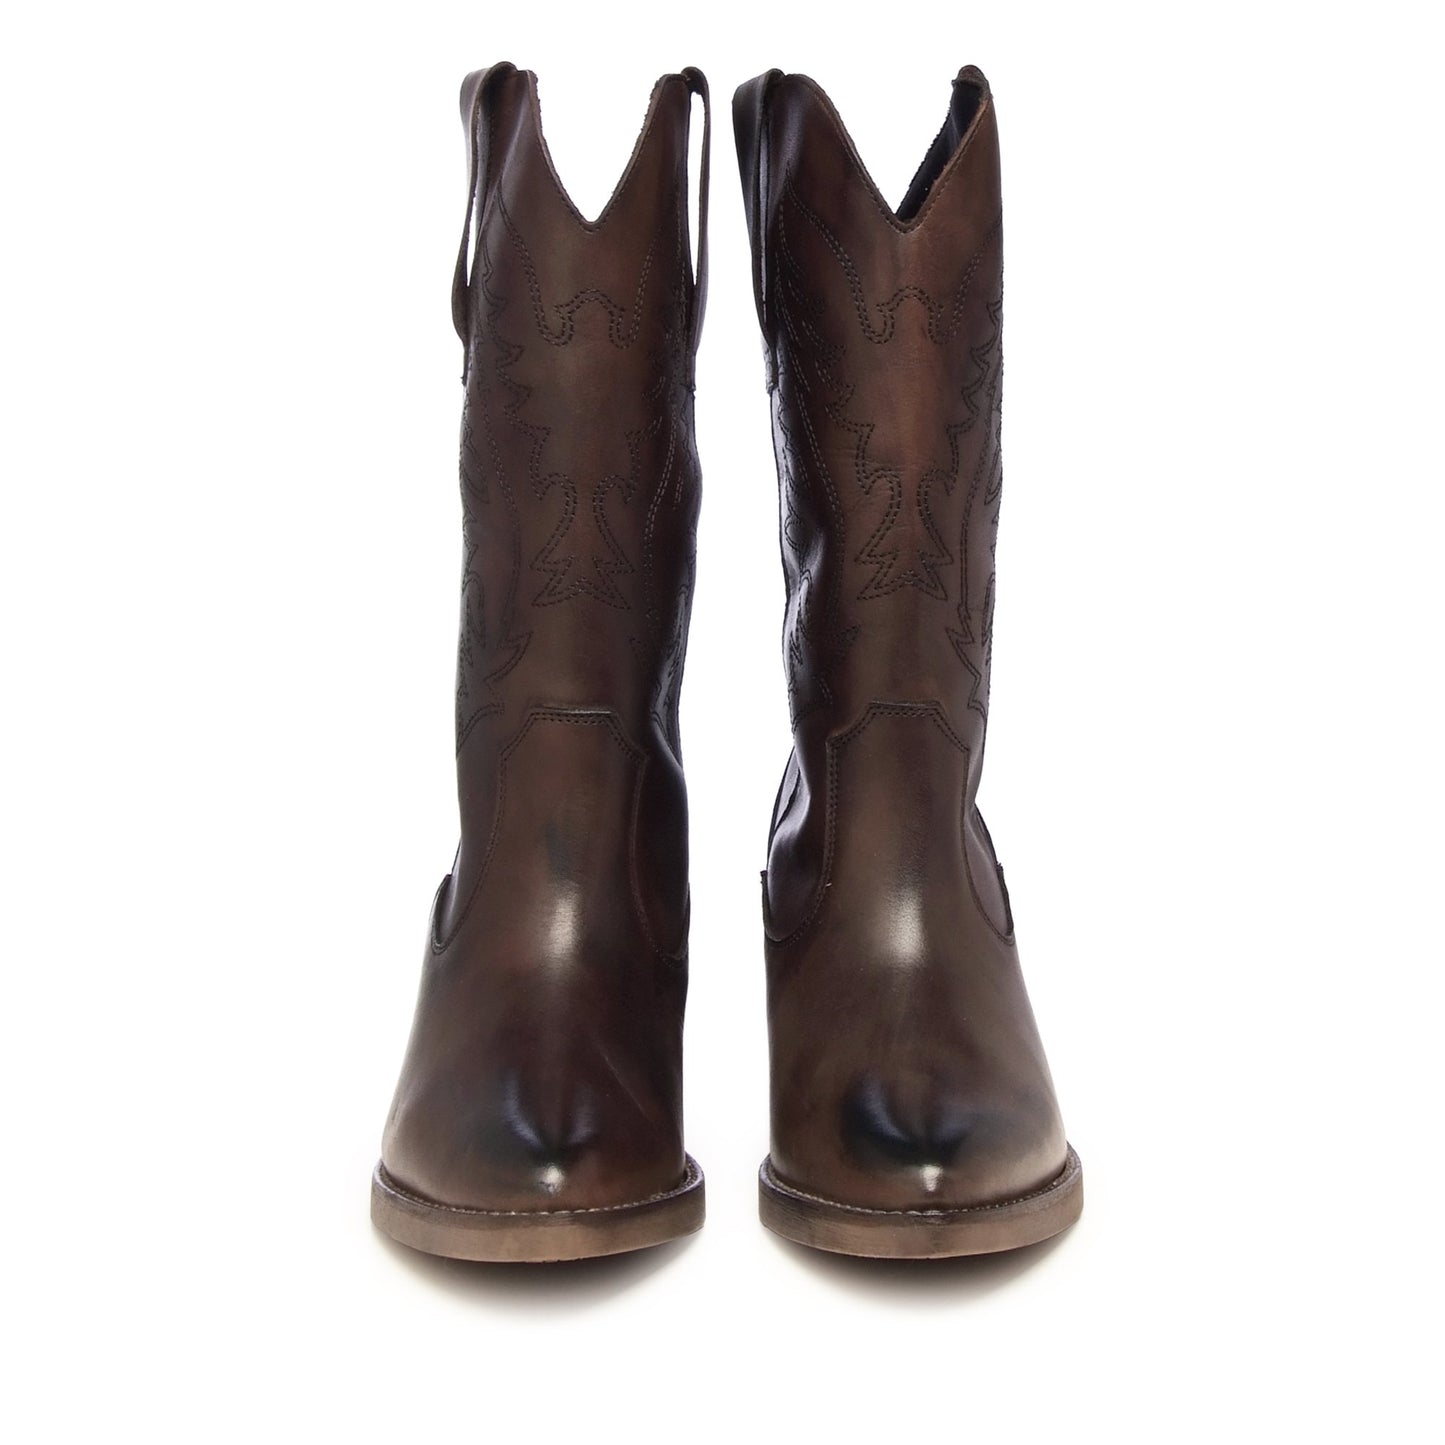 Chestnut Texan Leather Boots